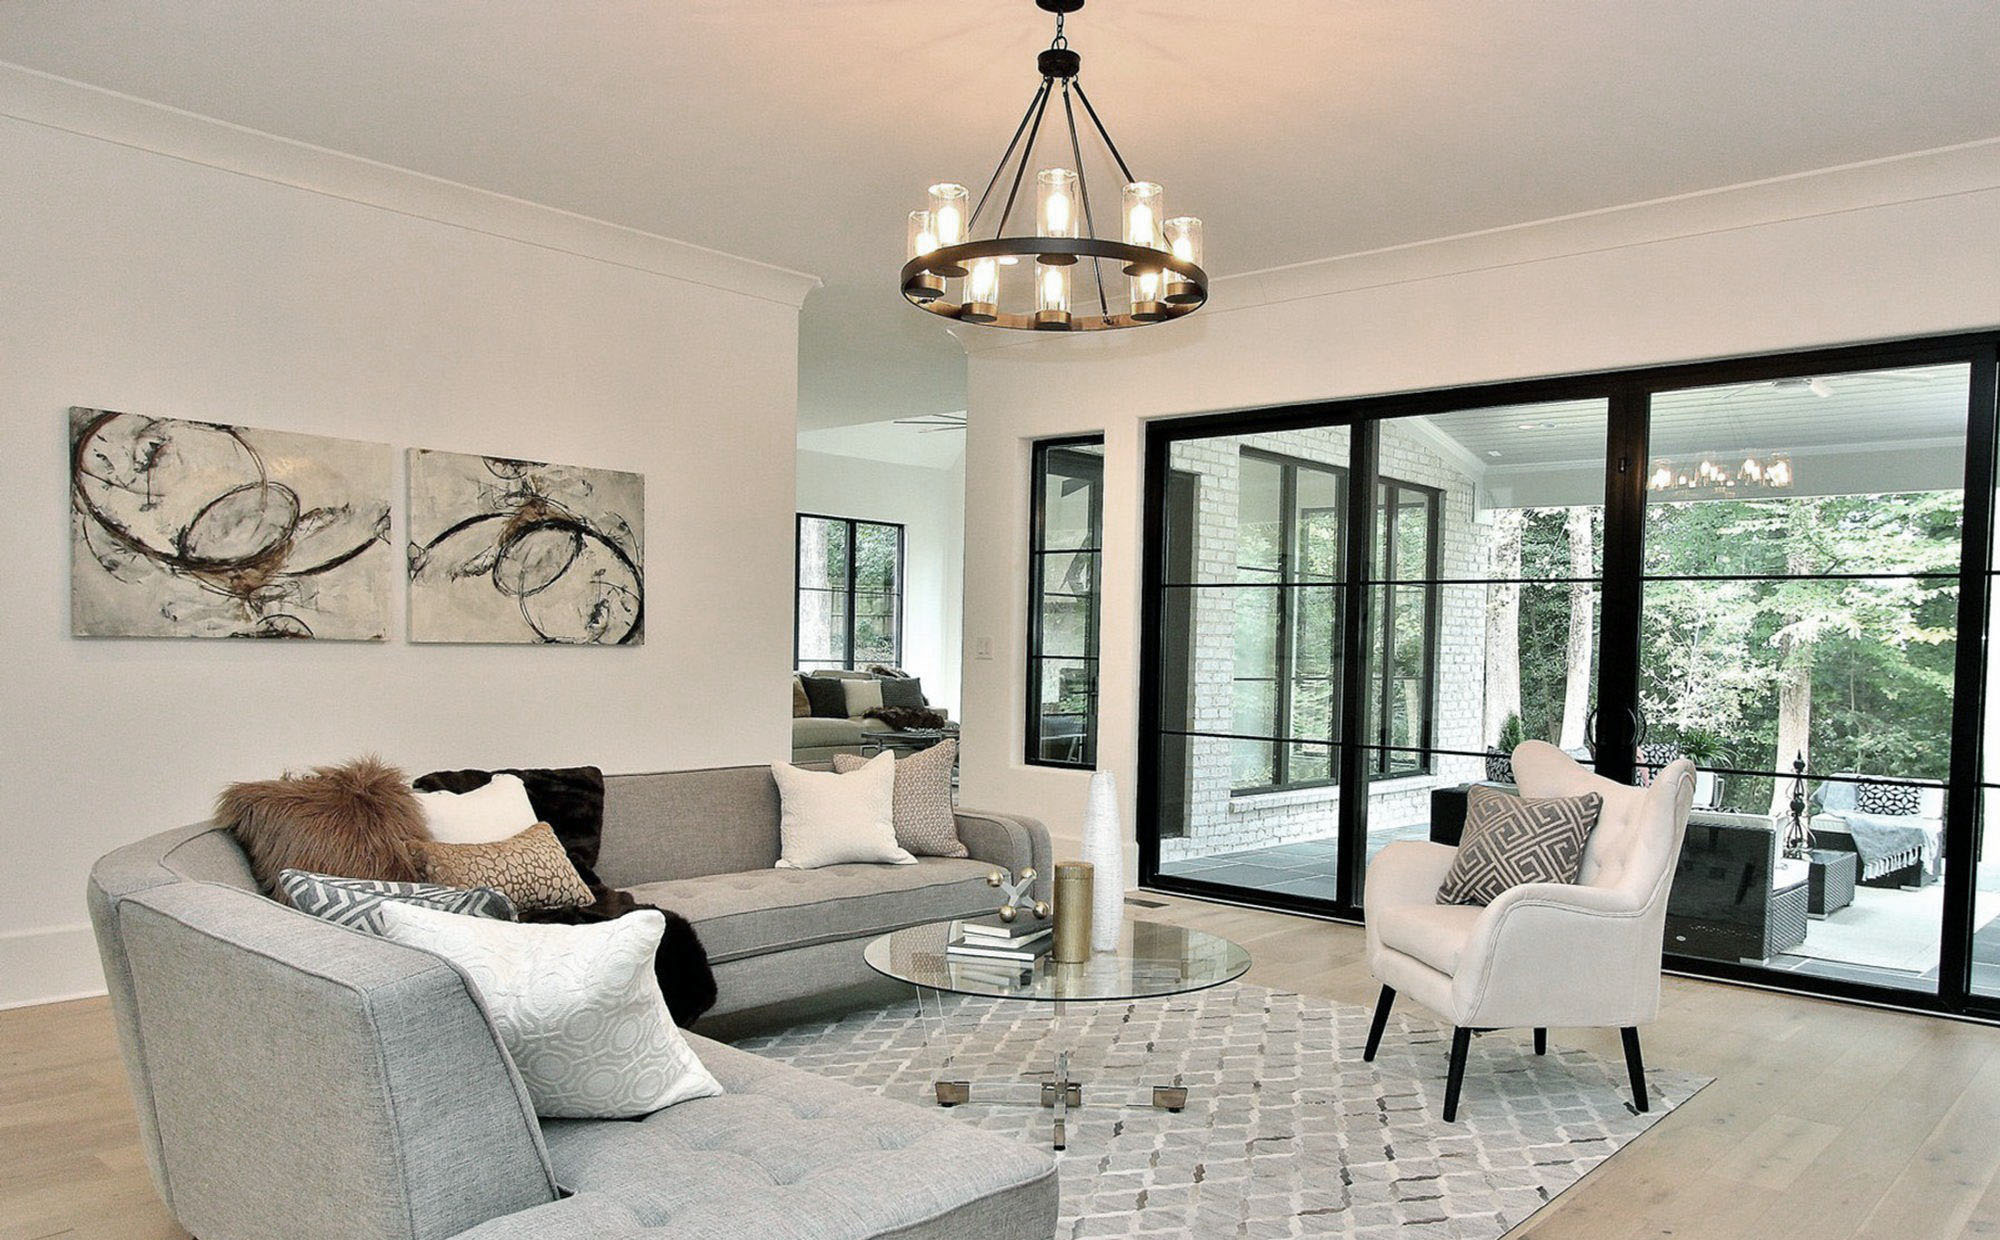 Modern living room with pale grey couch and pattern rug, black frame windows and doors and a pale wood floor.